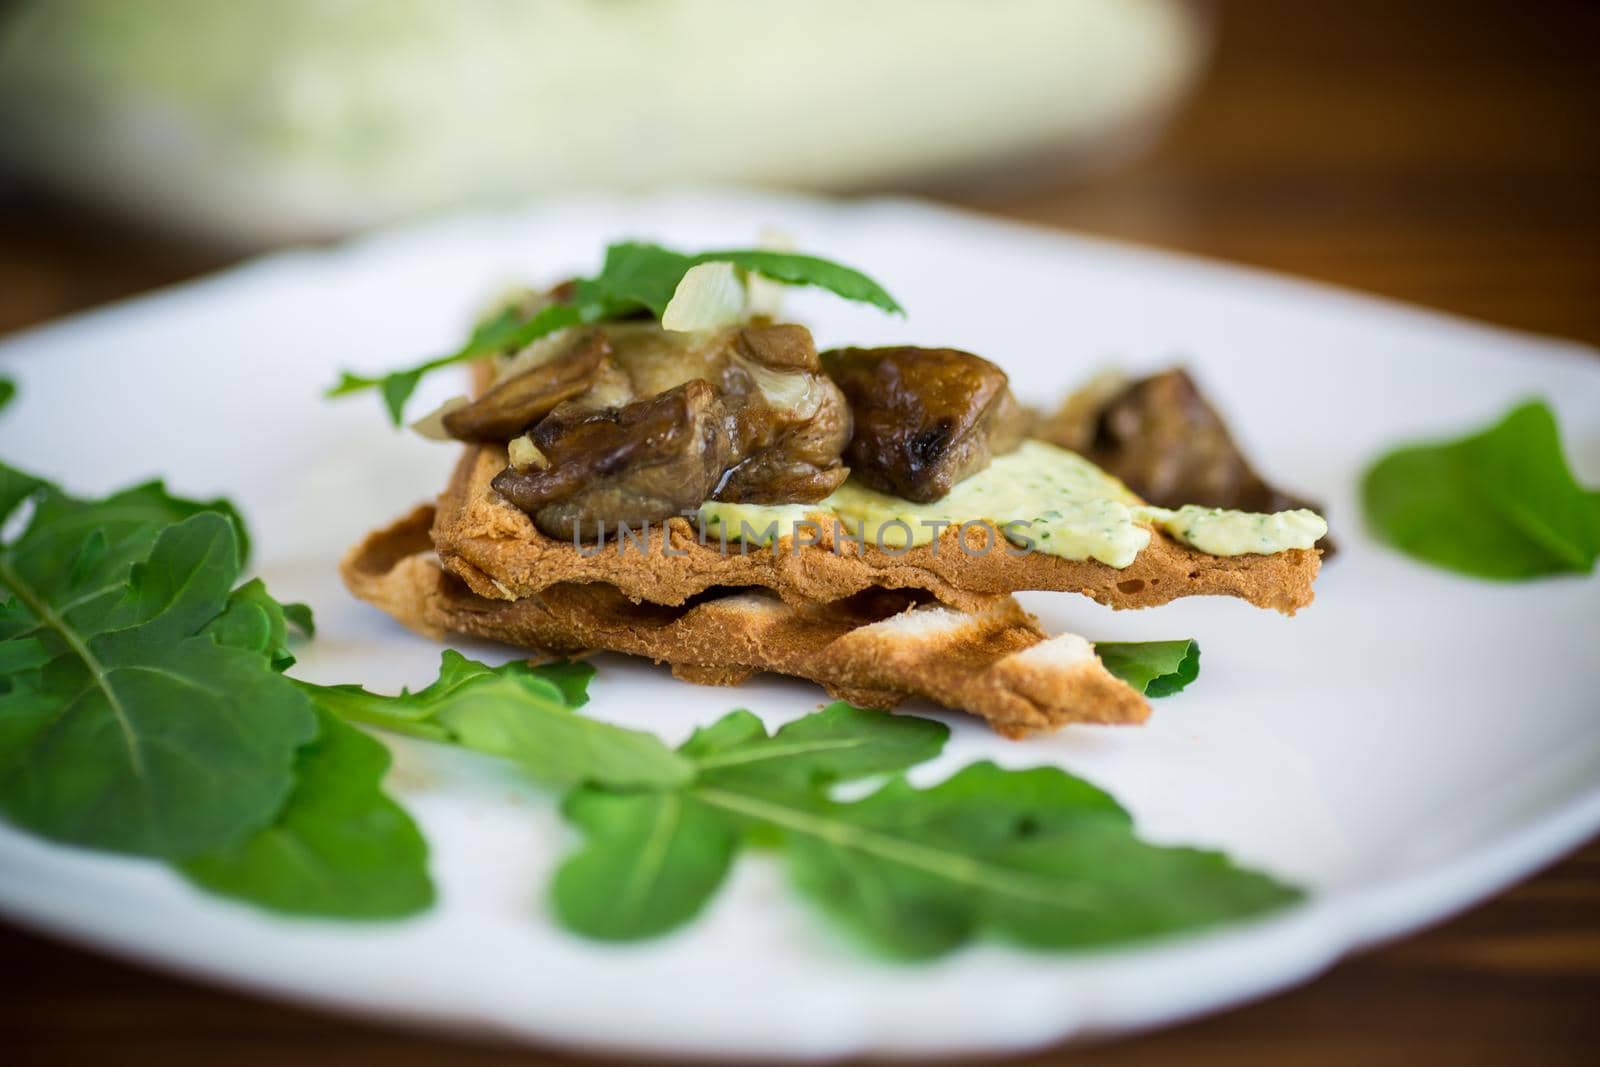 fried toast with cheese spread, arugula and fried mushrooms in a plate